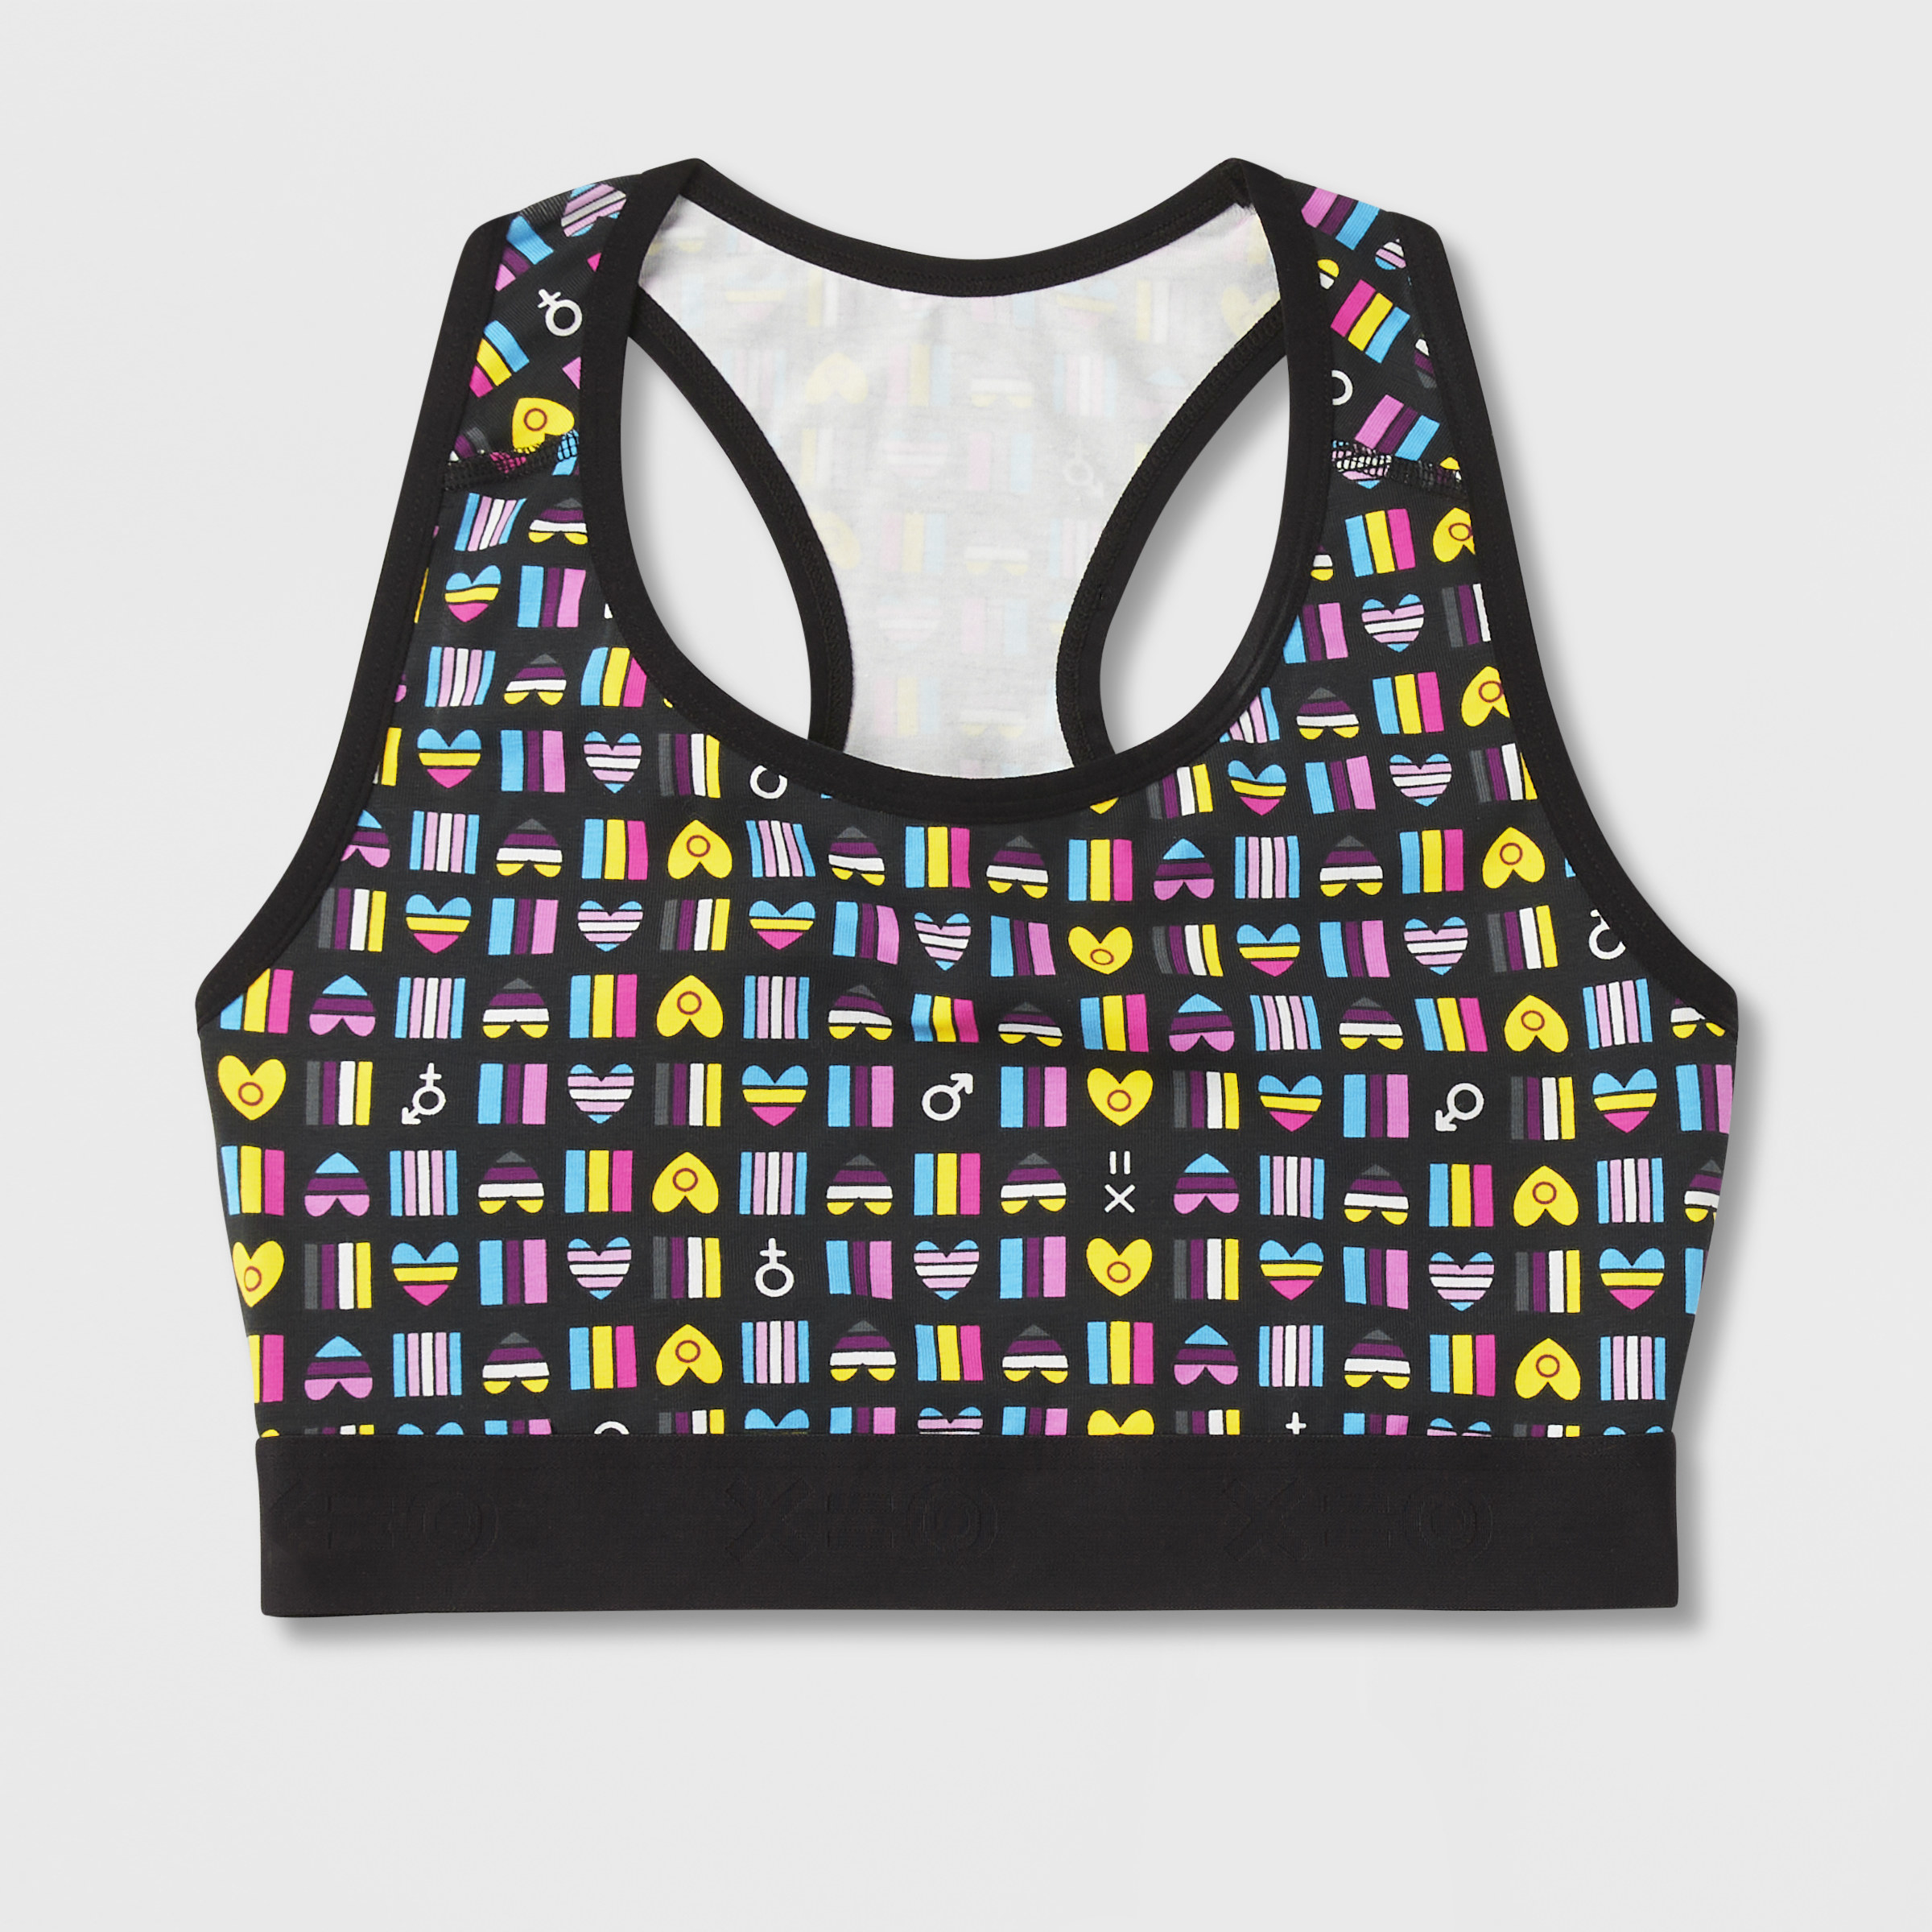 Racerback sports bra with colors of the transgender, nonbinary, bisexual, pansexual, and intersex flags